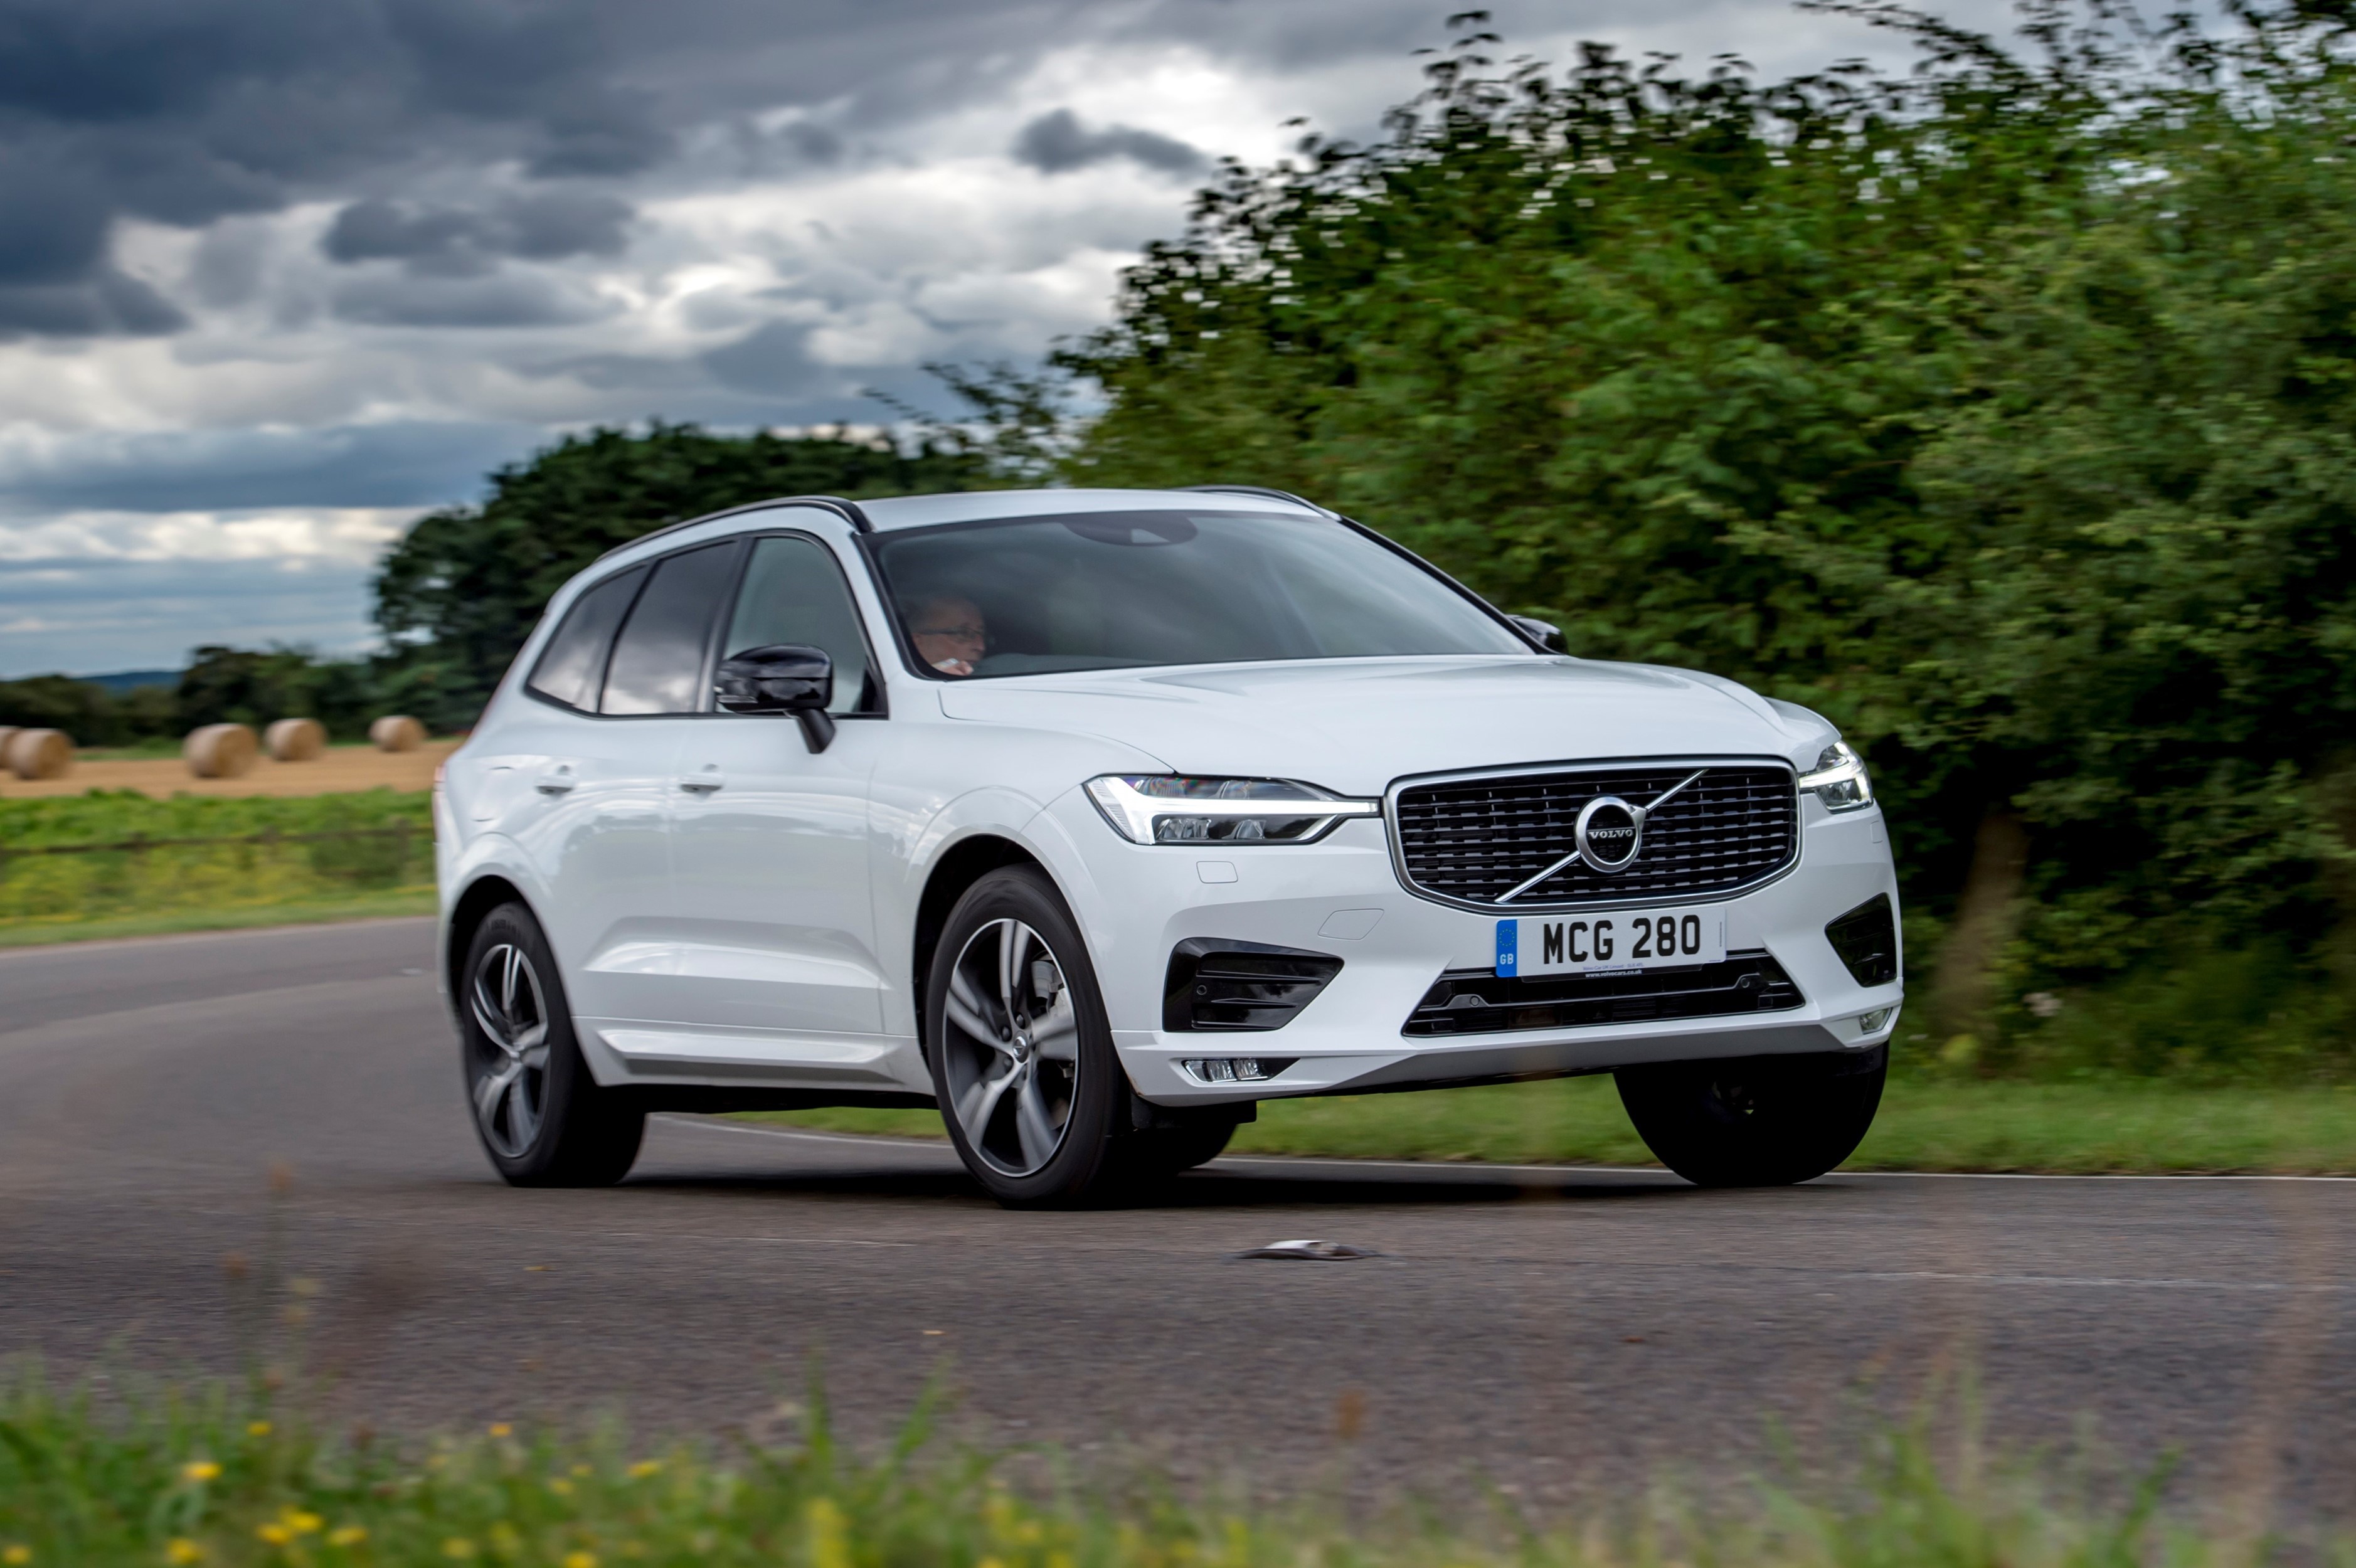 XC60 review | mild hybrid engines join line-up | Company Car Reviews